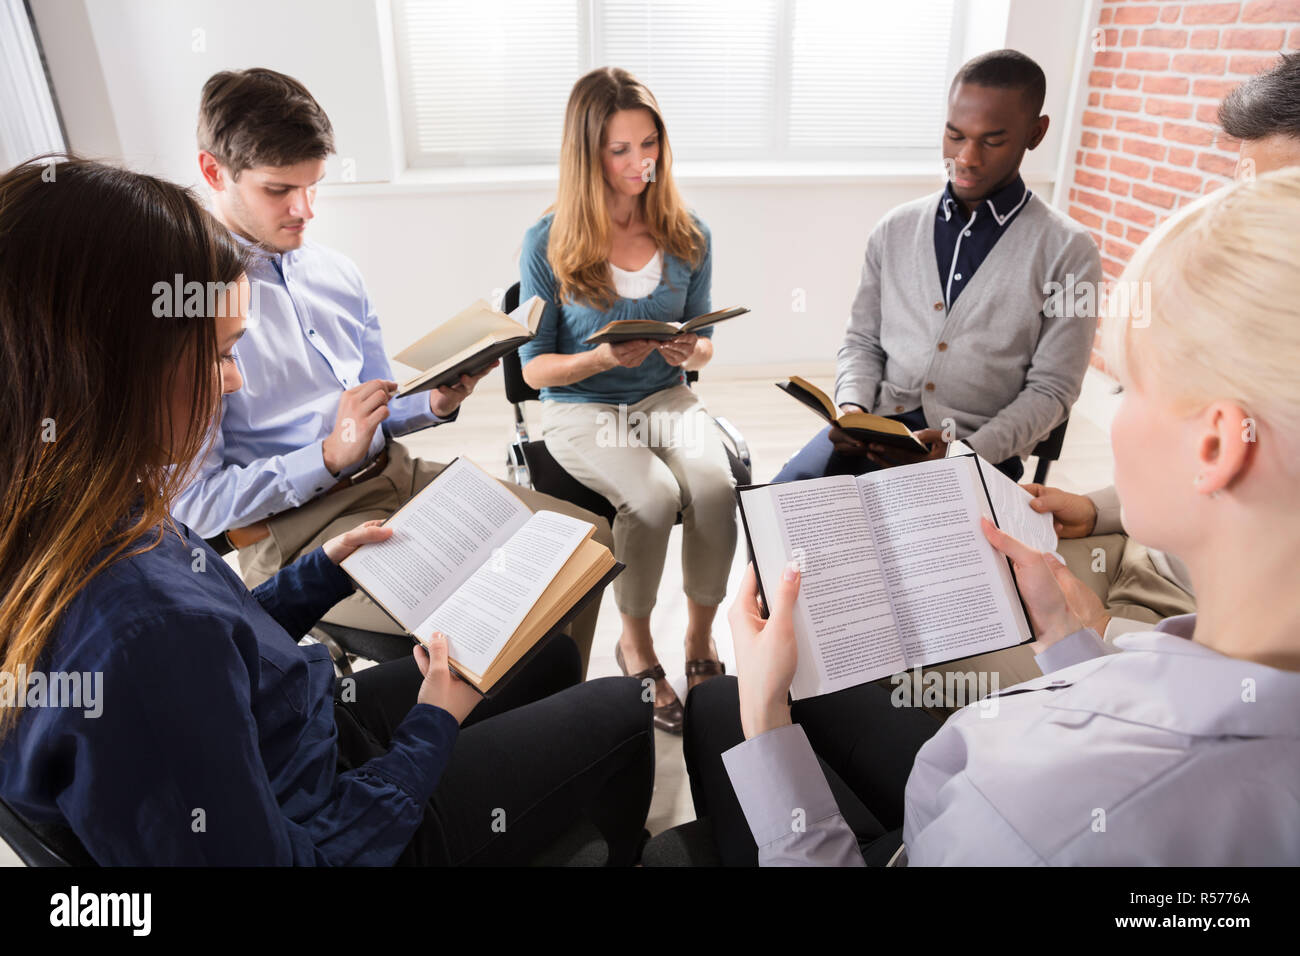 Group Of People Reading Bibles Stock Photo